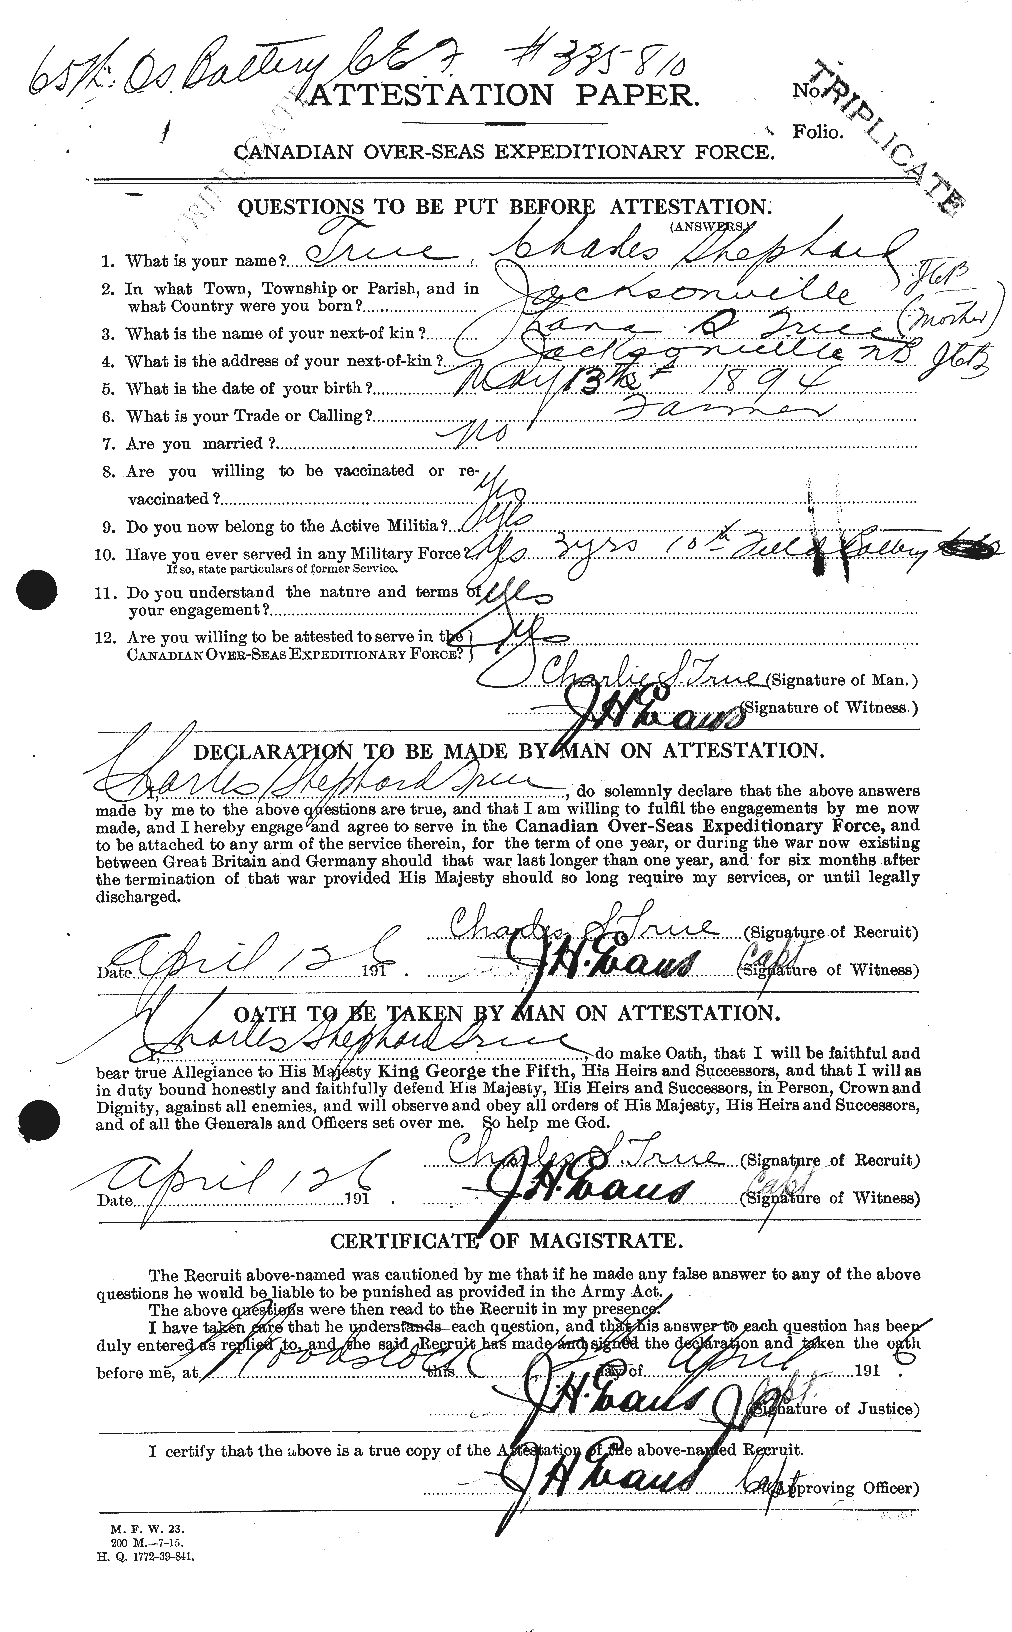 Personnel Records of the First World War - CEF 641427a